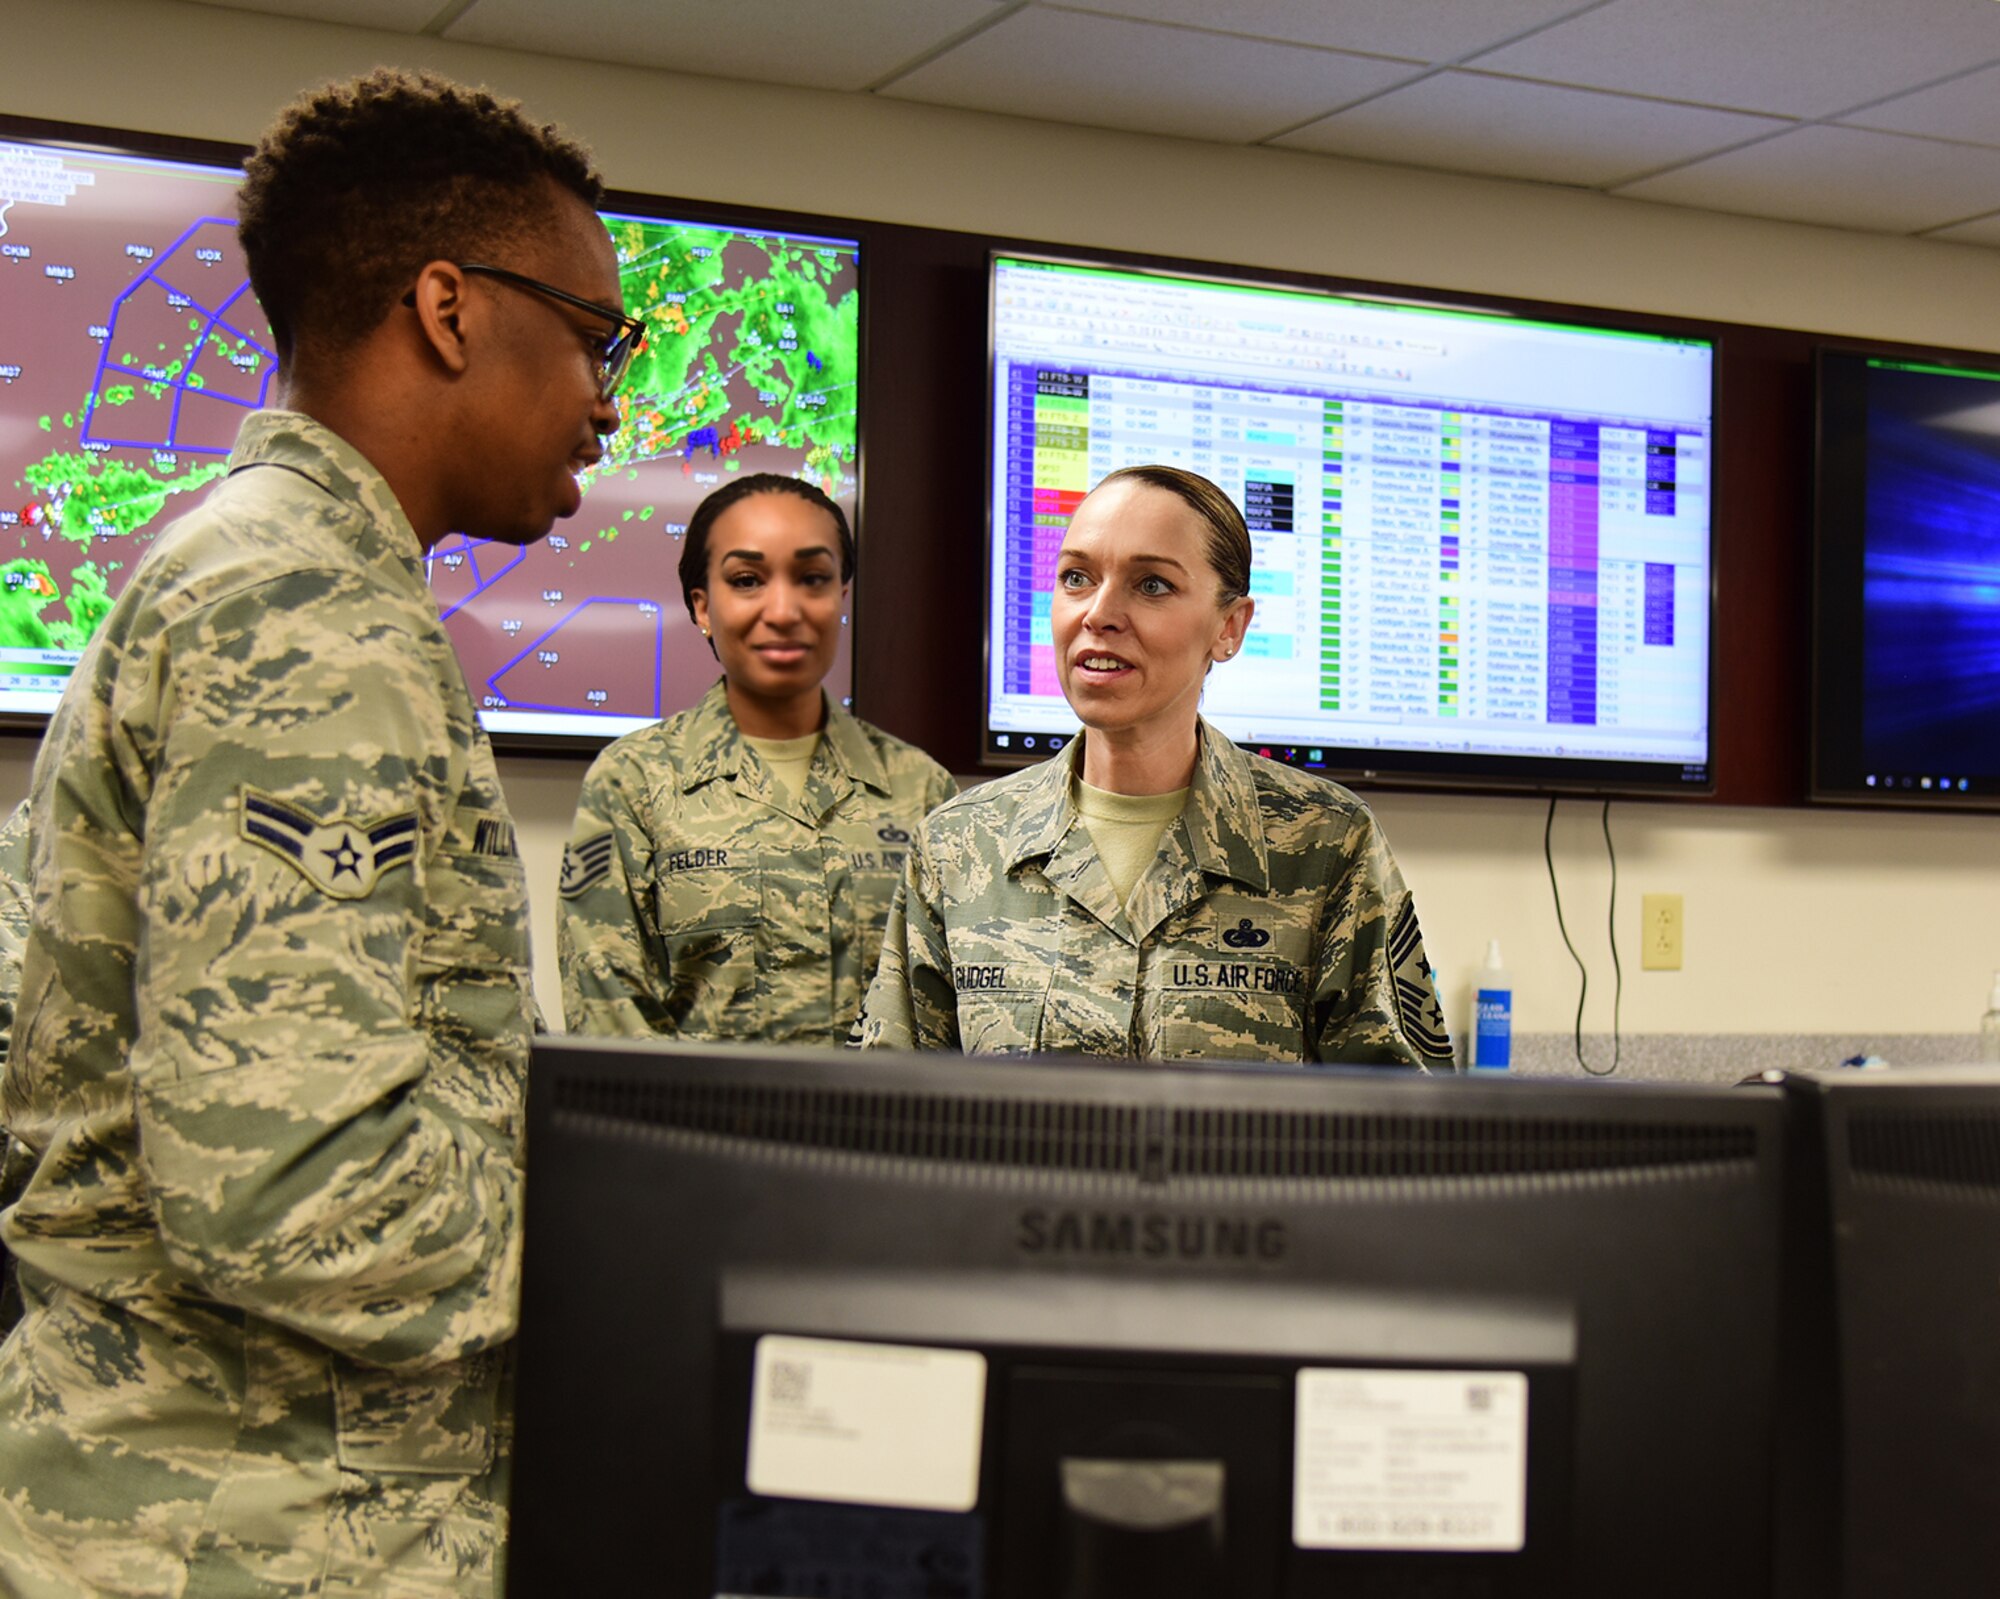 U.S. Air Force Airman 1st Class Rodney Williams, 14th Operations Support Squadron aviation resource manager, talks with Chief Master Sgt. Juliet Gudgel, command chief of Air Education and Training Command, at Columbus Air Force Base, Mississippi, June 21, 2018. Gudgel immersed herself into the 14th Flying Training Wing’s mission by visiting various units around base. (U.S. Air Force photo by Elizabeth Owens)